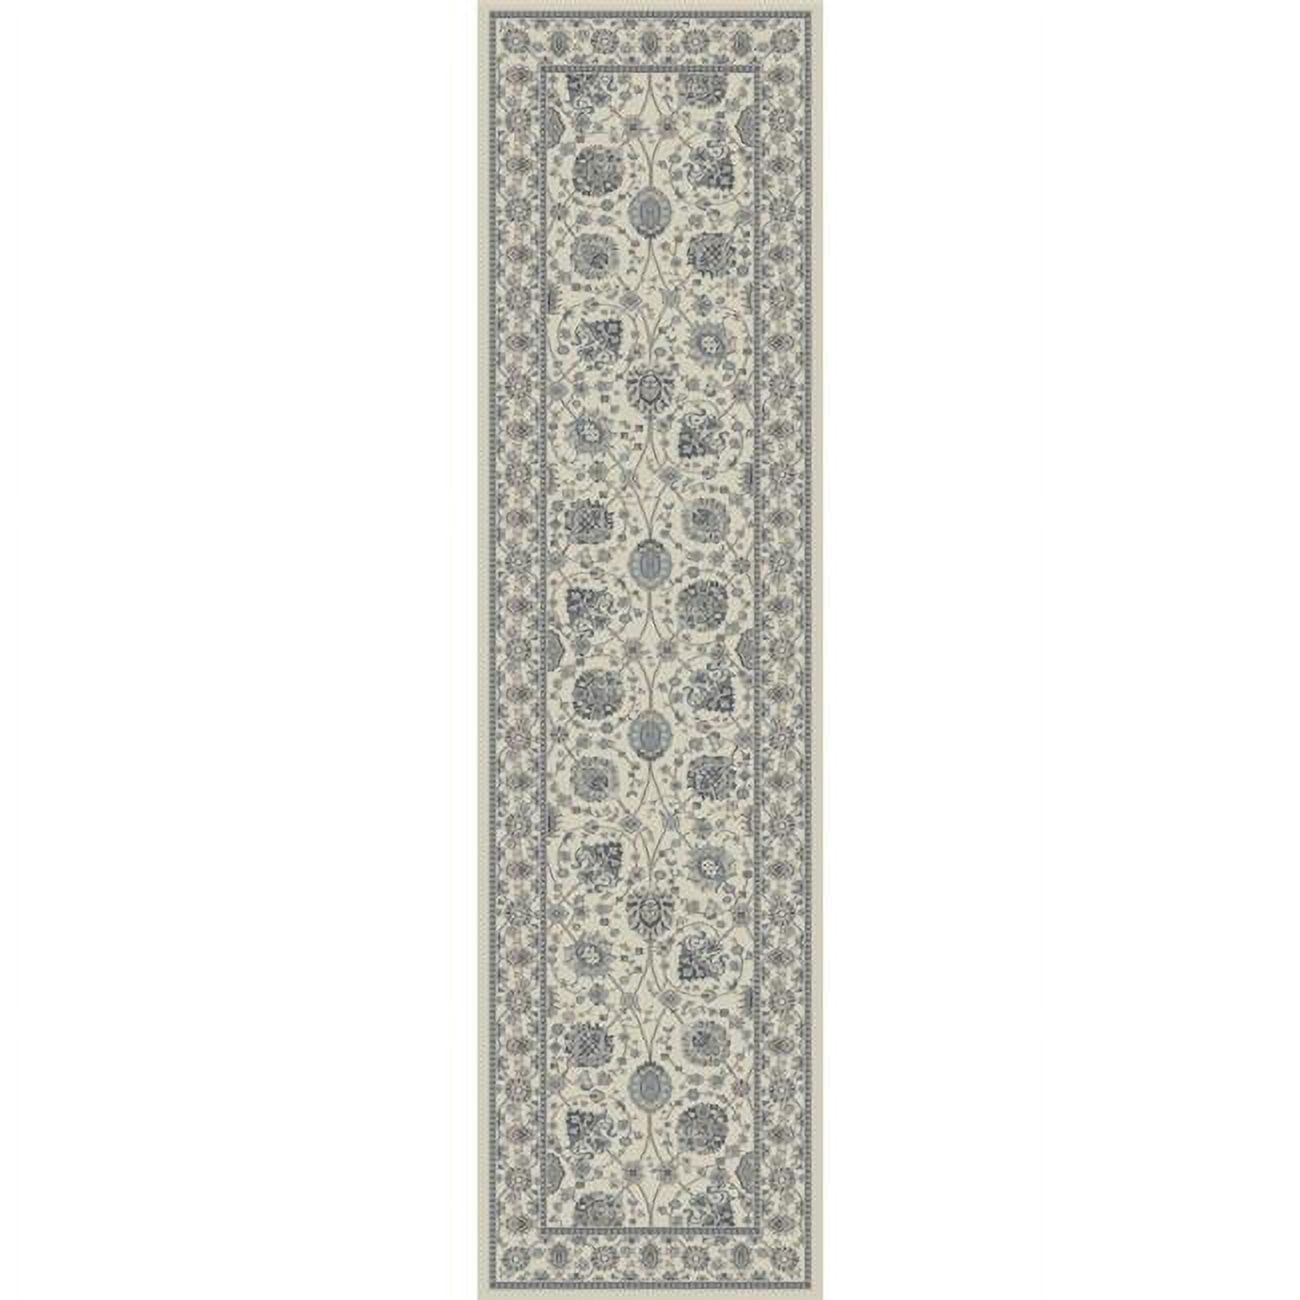 Picture of Concord Global 28422 2 ft. x 7 ft. 3 in. Kashan Kashan - Ivory